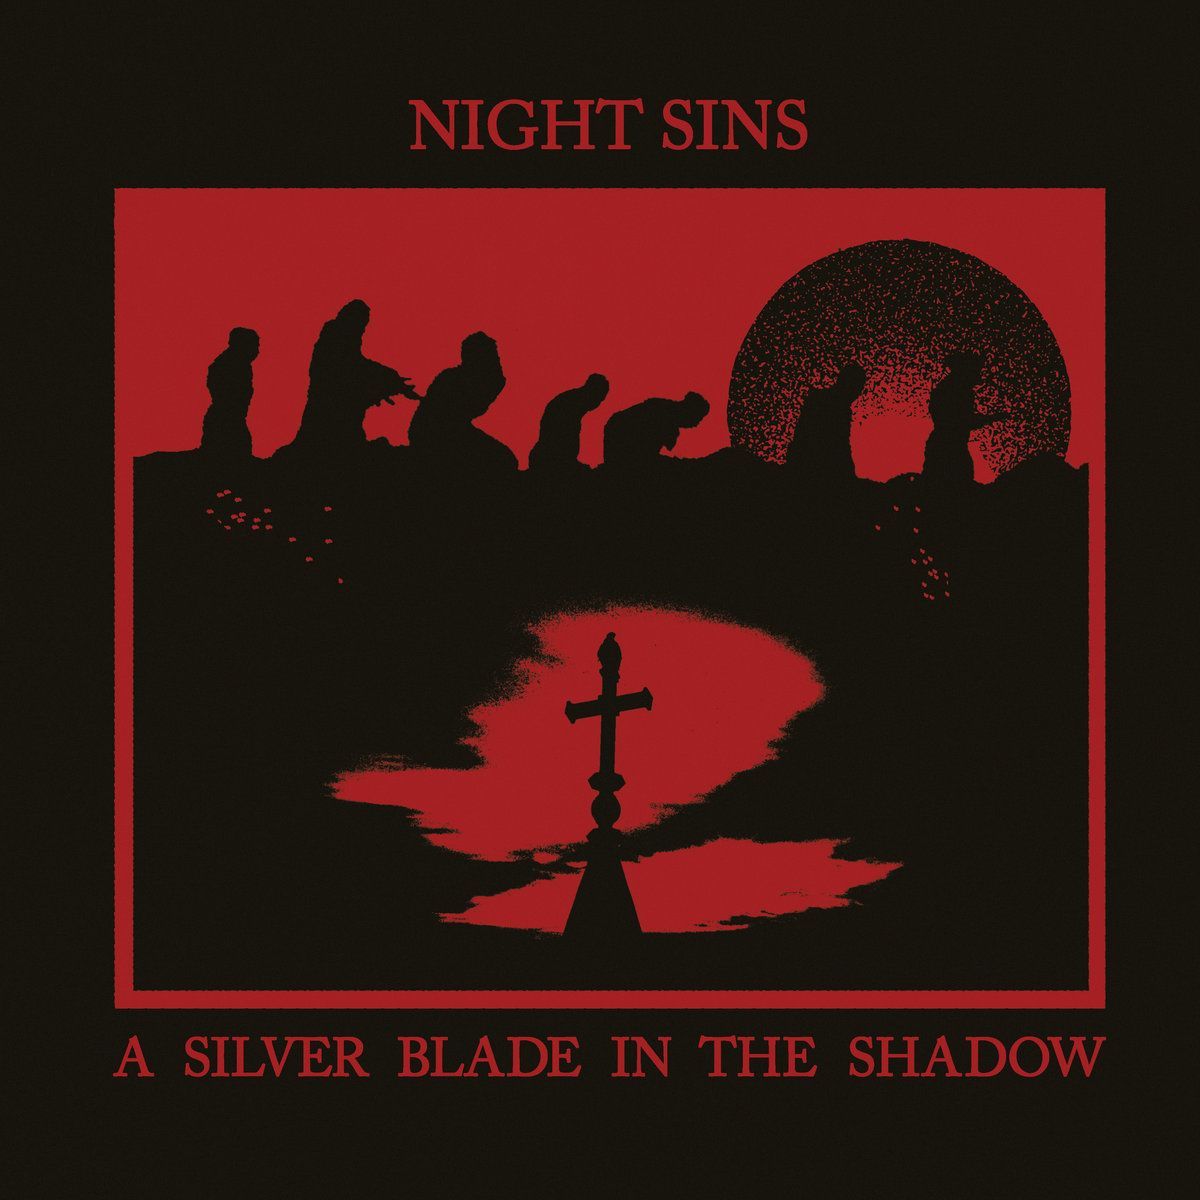 Philadelphia’s NIGHT SINS Debuts Video for Brooding Gothic Rock Dirge “Silver Blade”